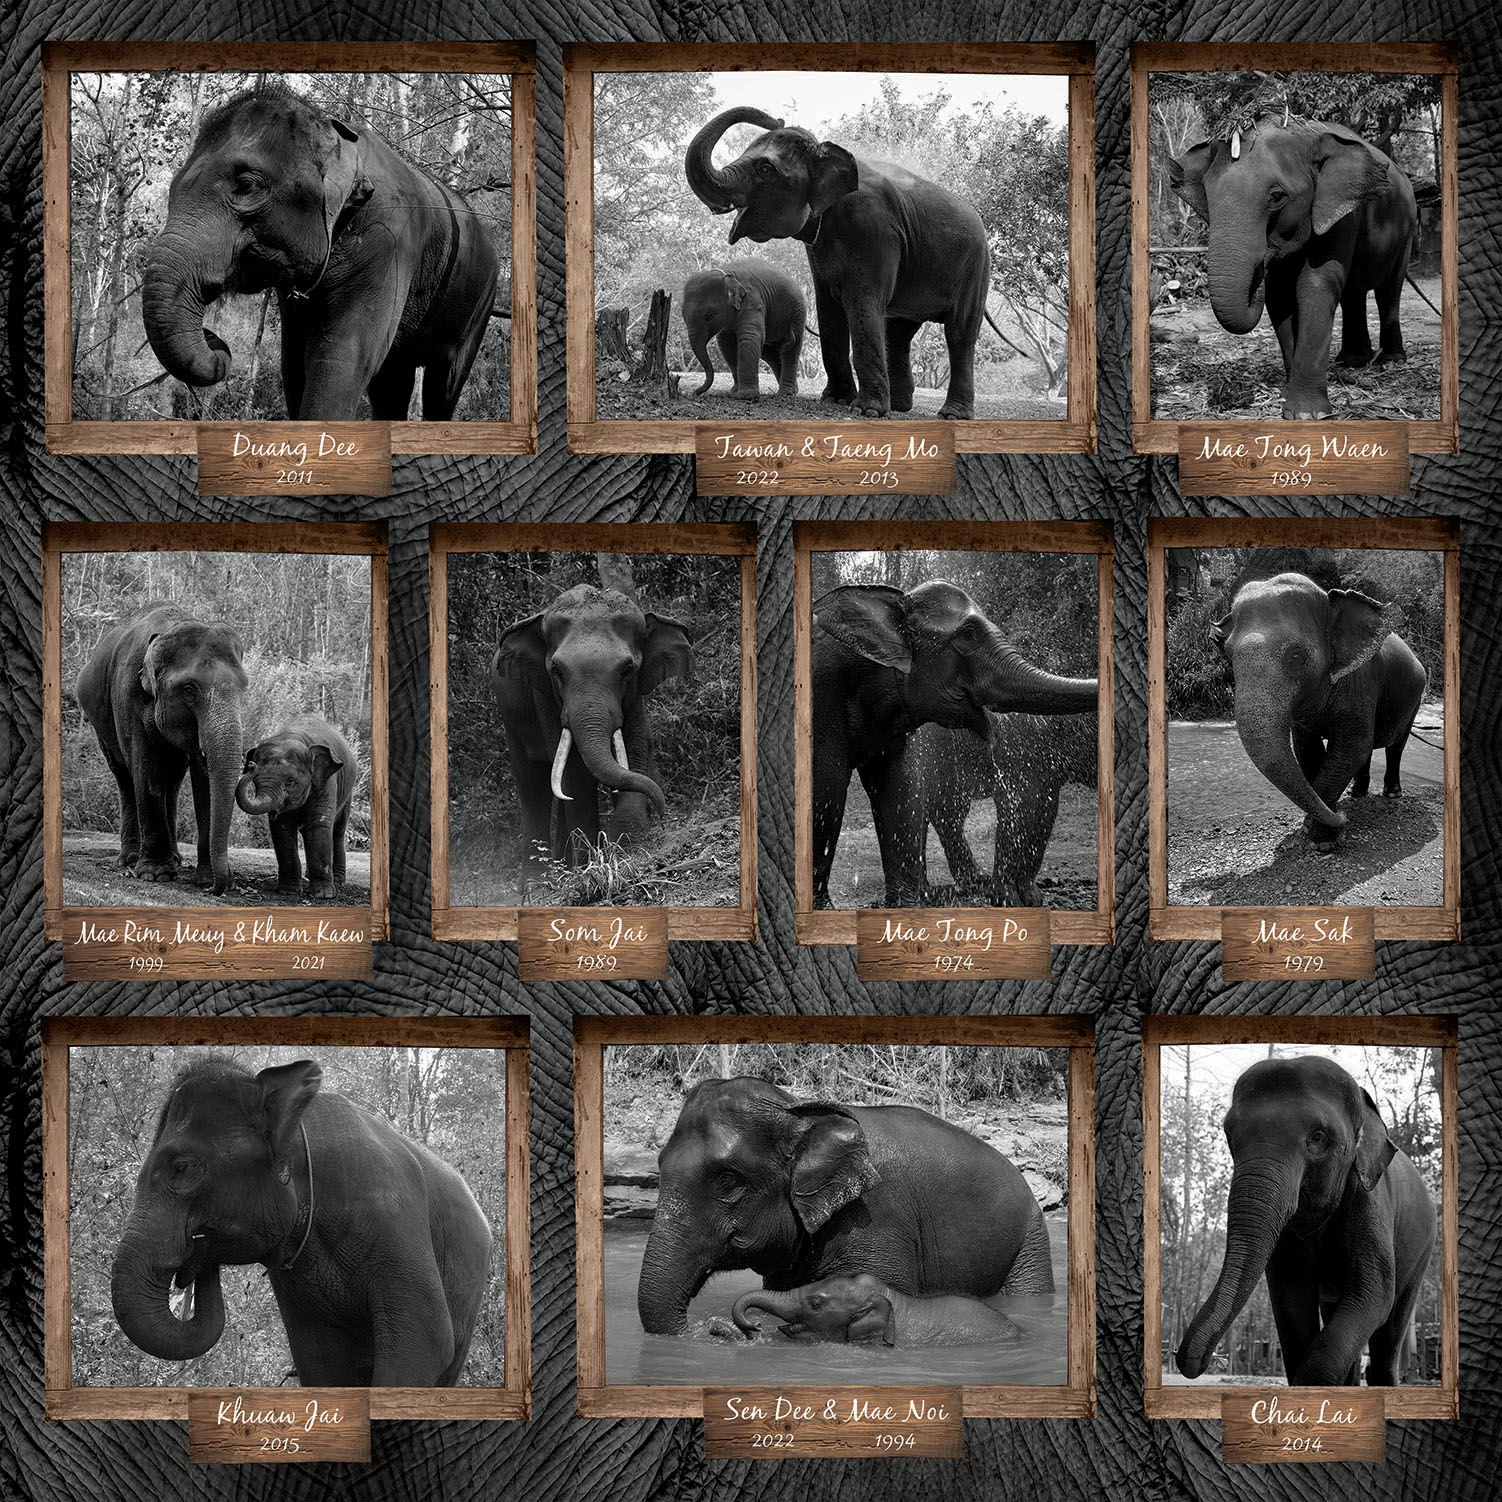 big elephant - Picture of Karen's Tribe Native Elephants, Chiang